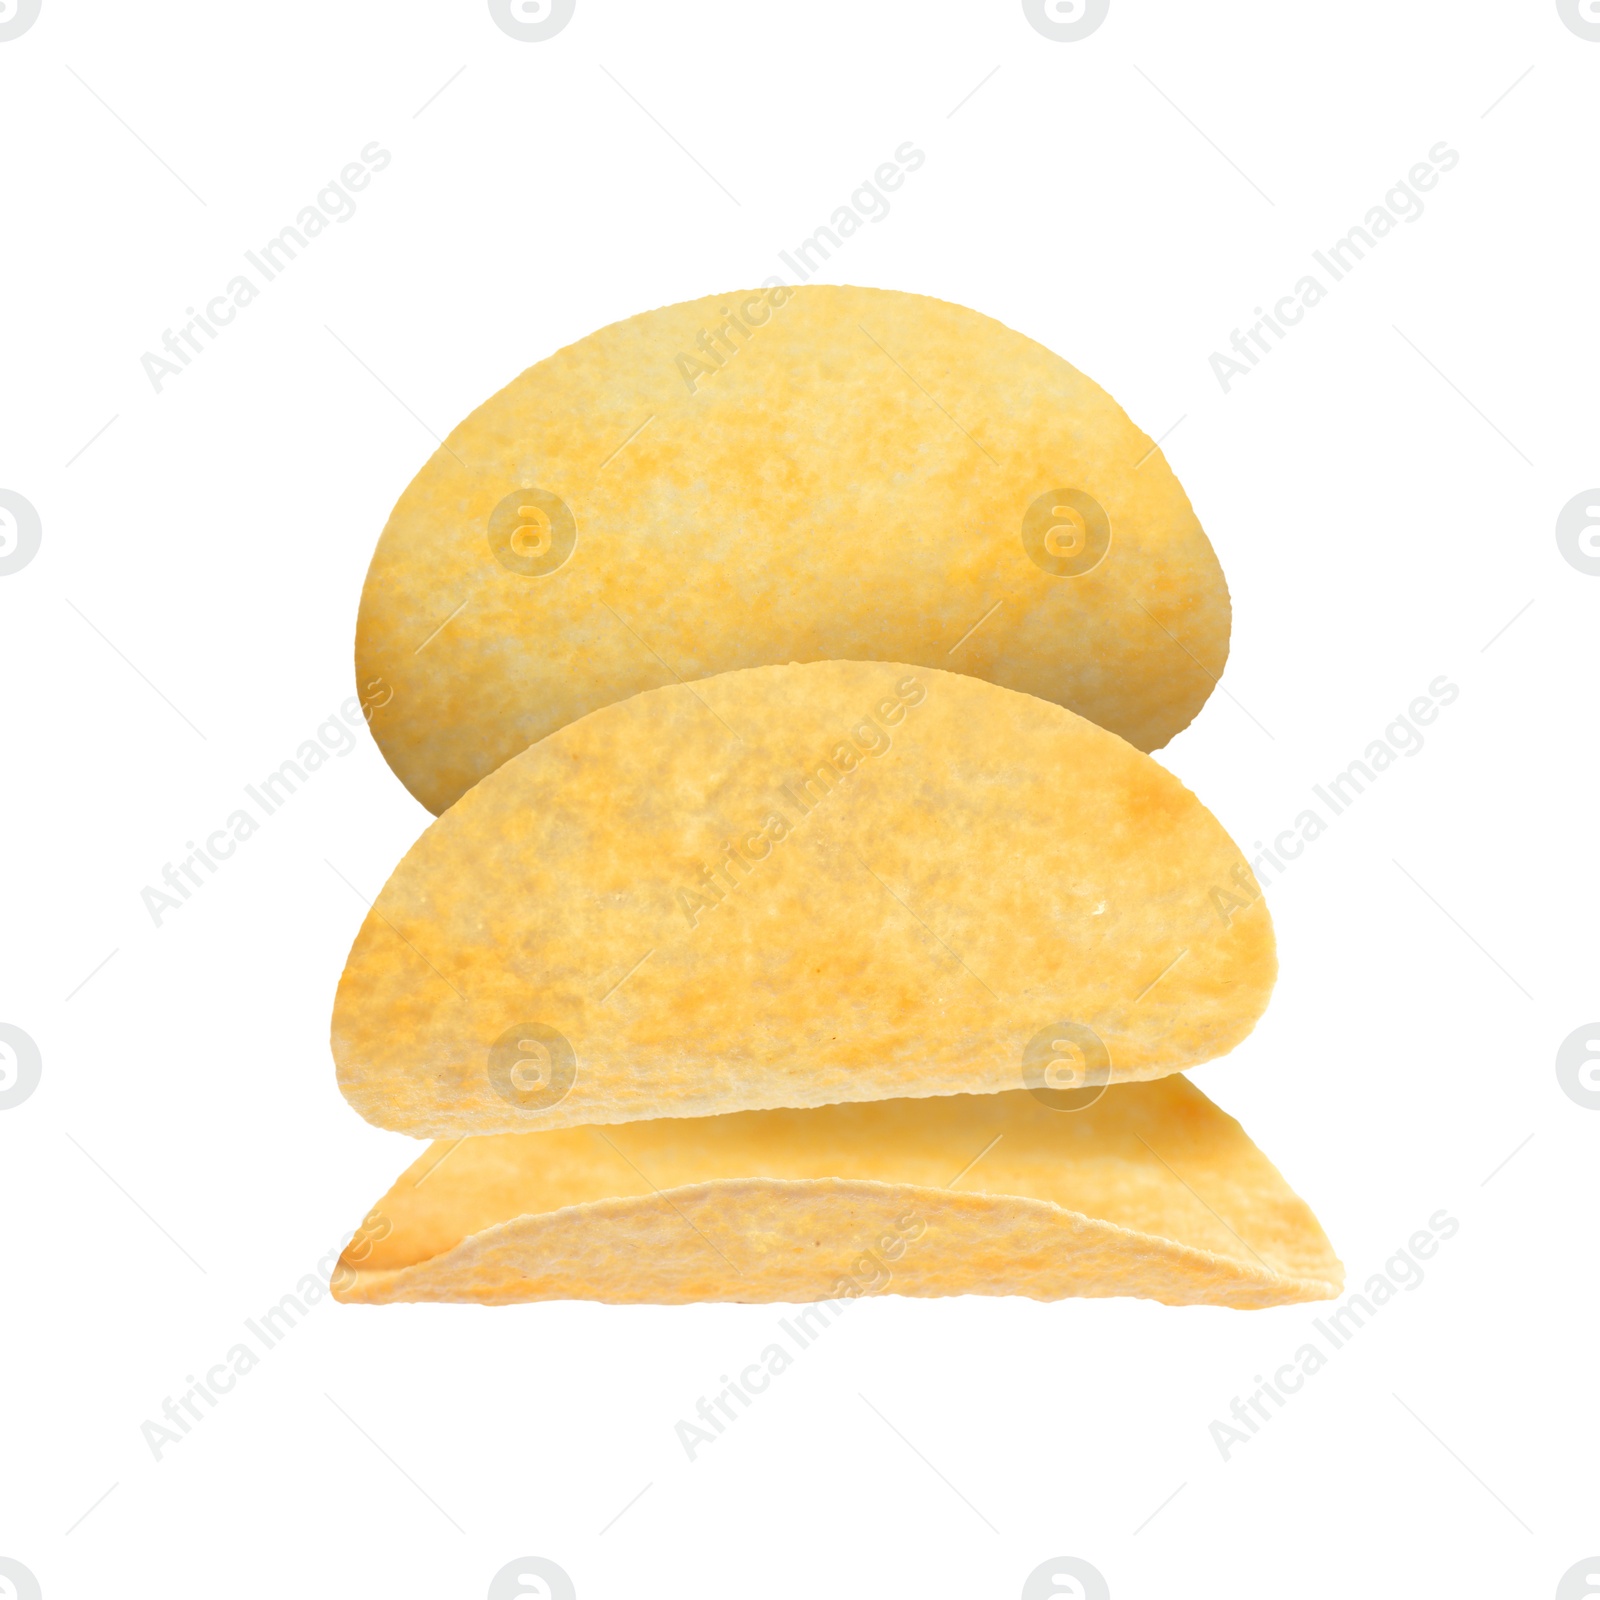 Image of Stack of tasty potato chips on white background